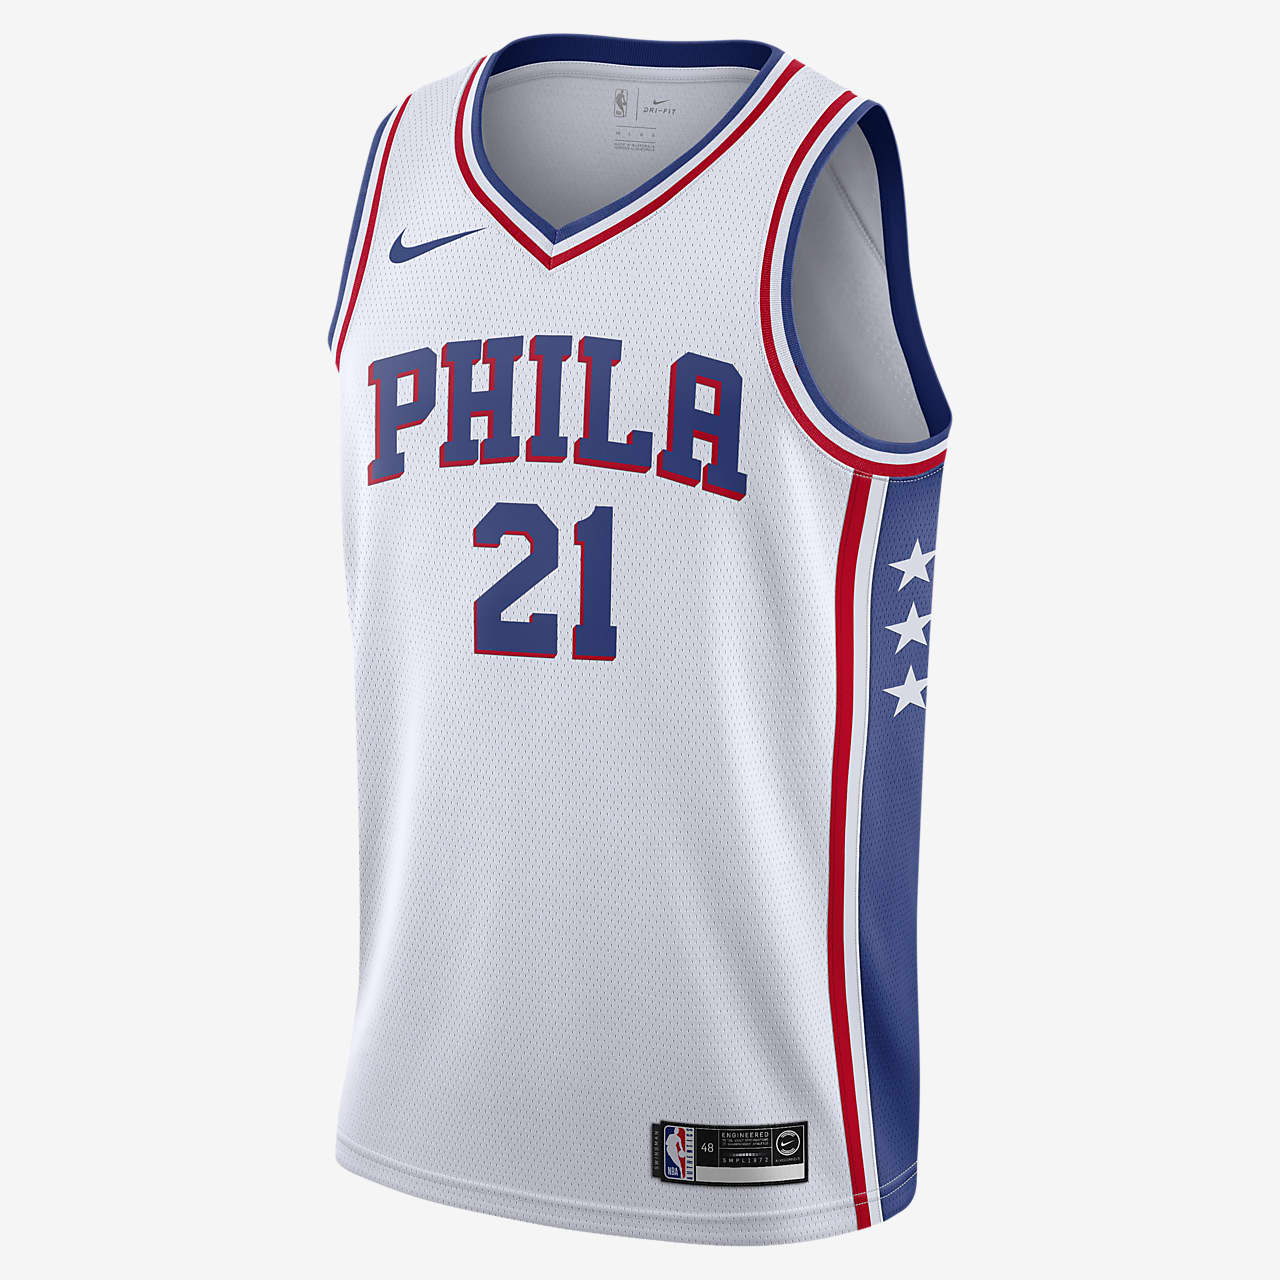 76ers new nike jersey